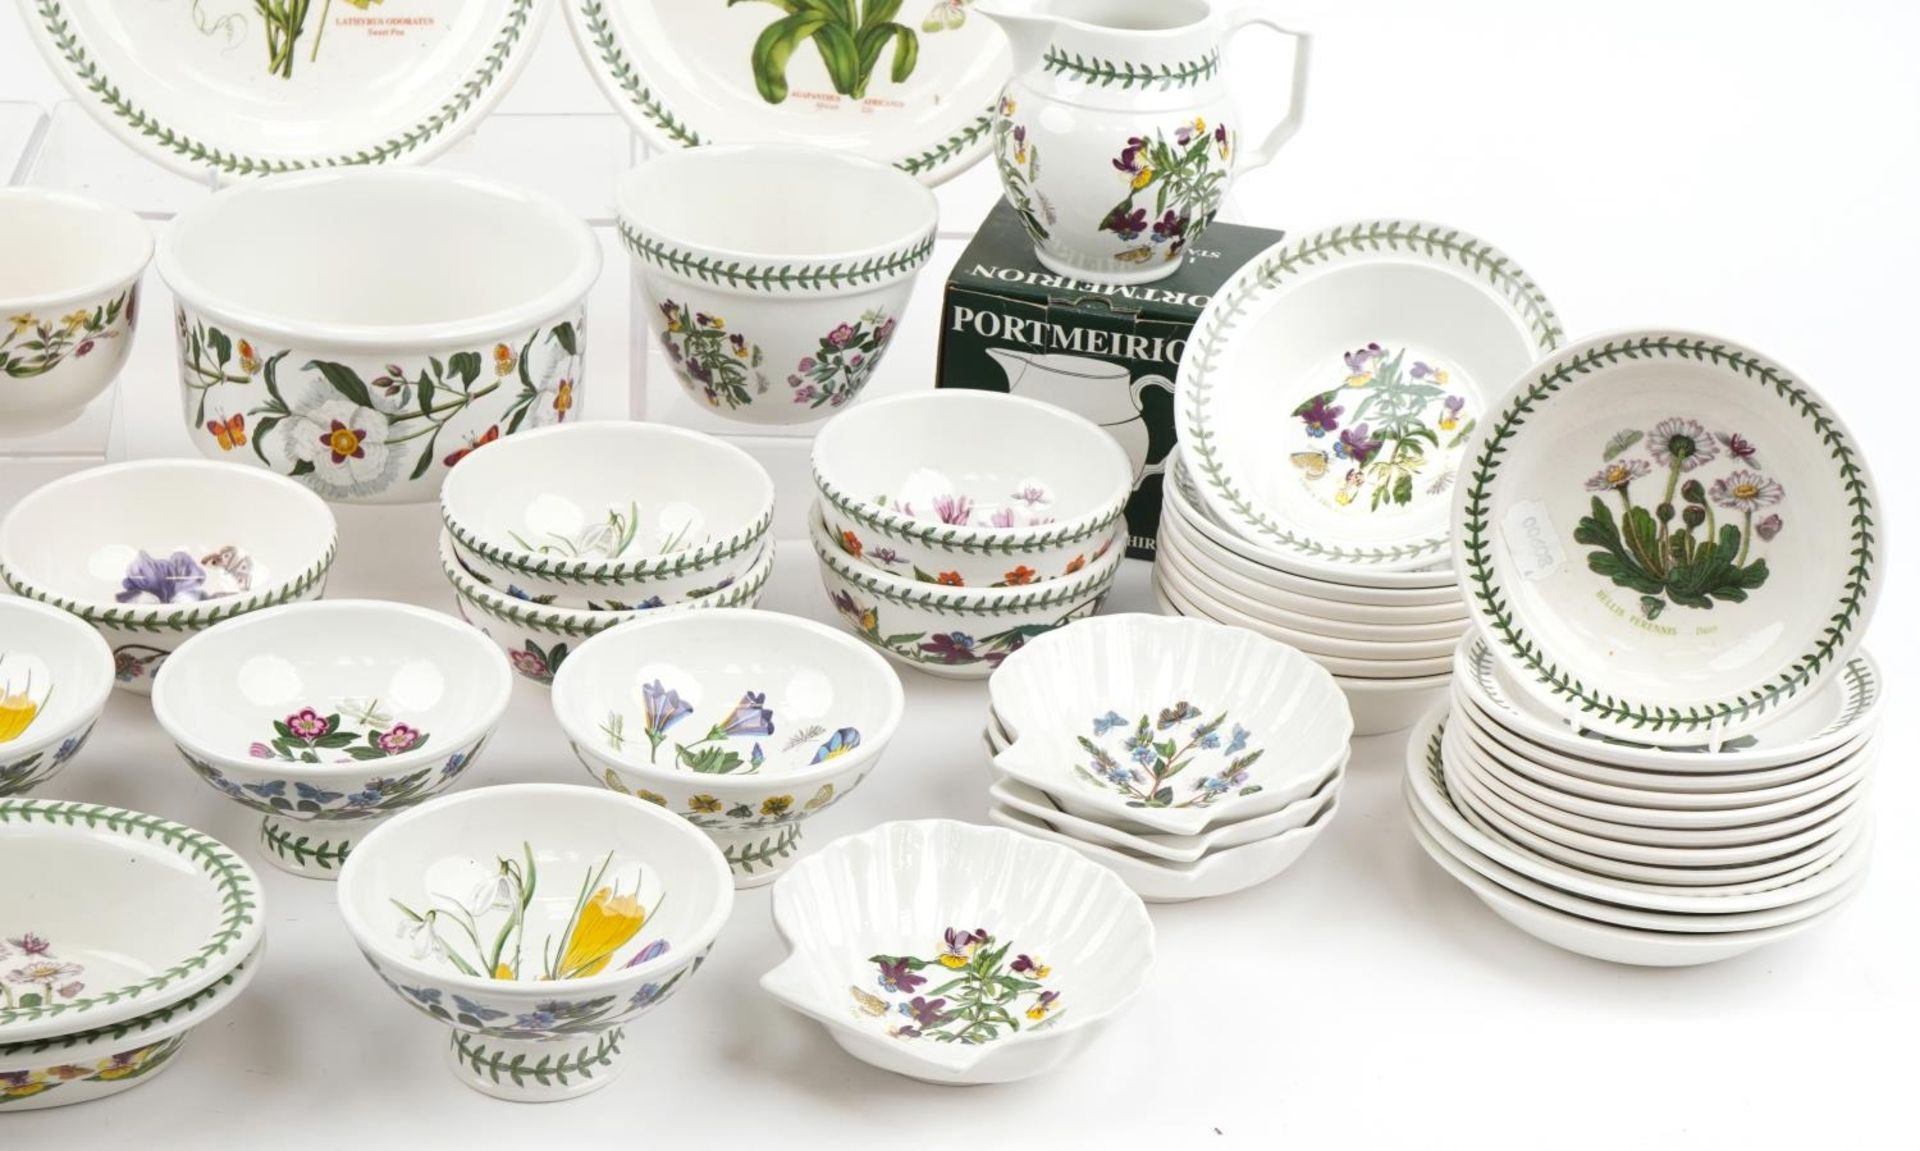 Large collection of Portmeirion Botanic Garden plates, bowls and dishes, the largest 27cm in - Image 9 of 14